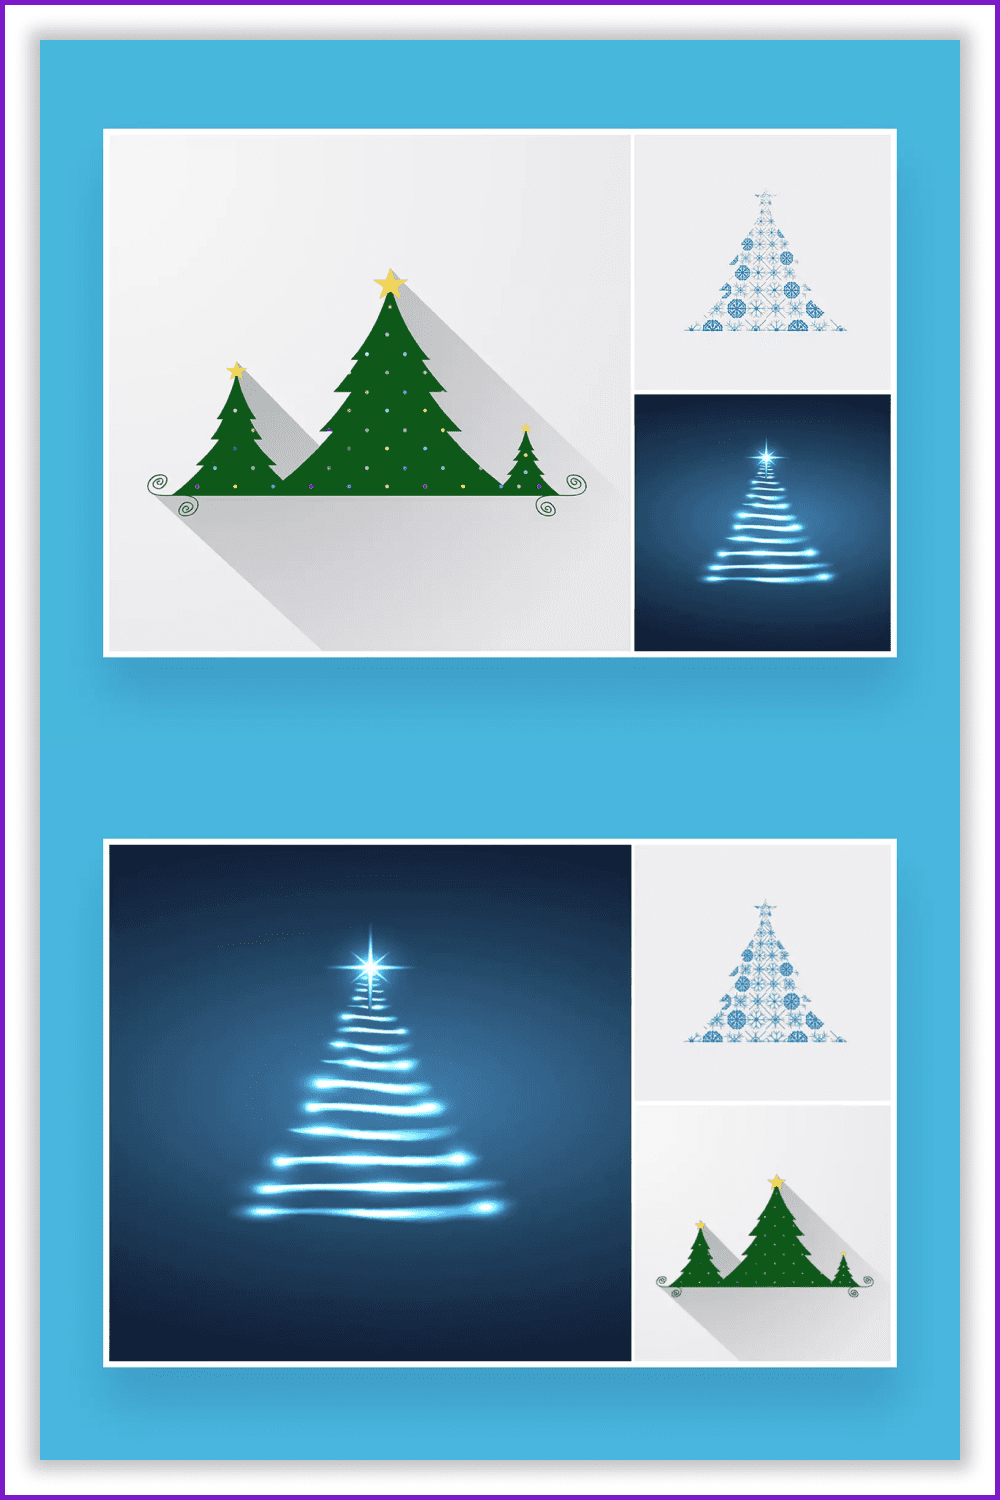 Collage of original images of Christmas trees.